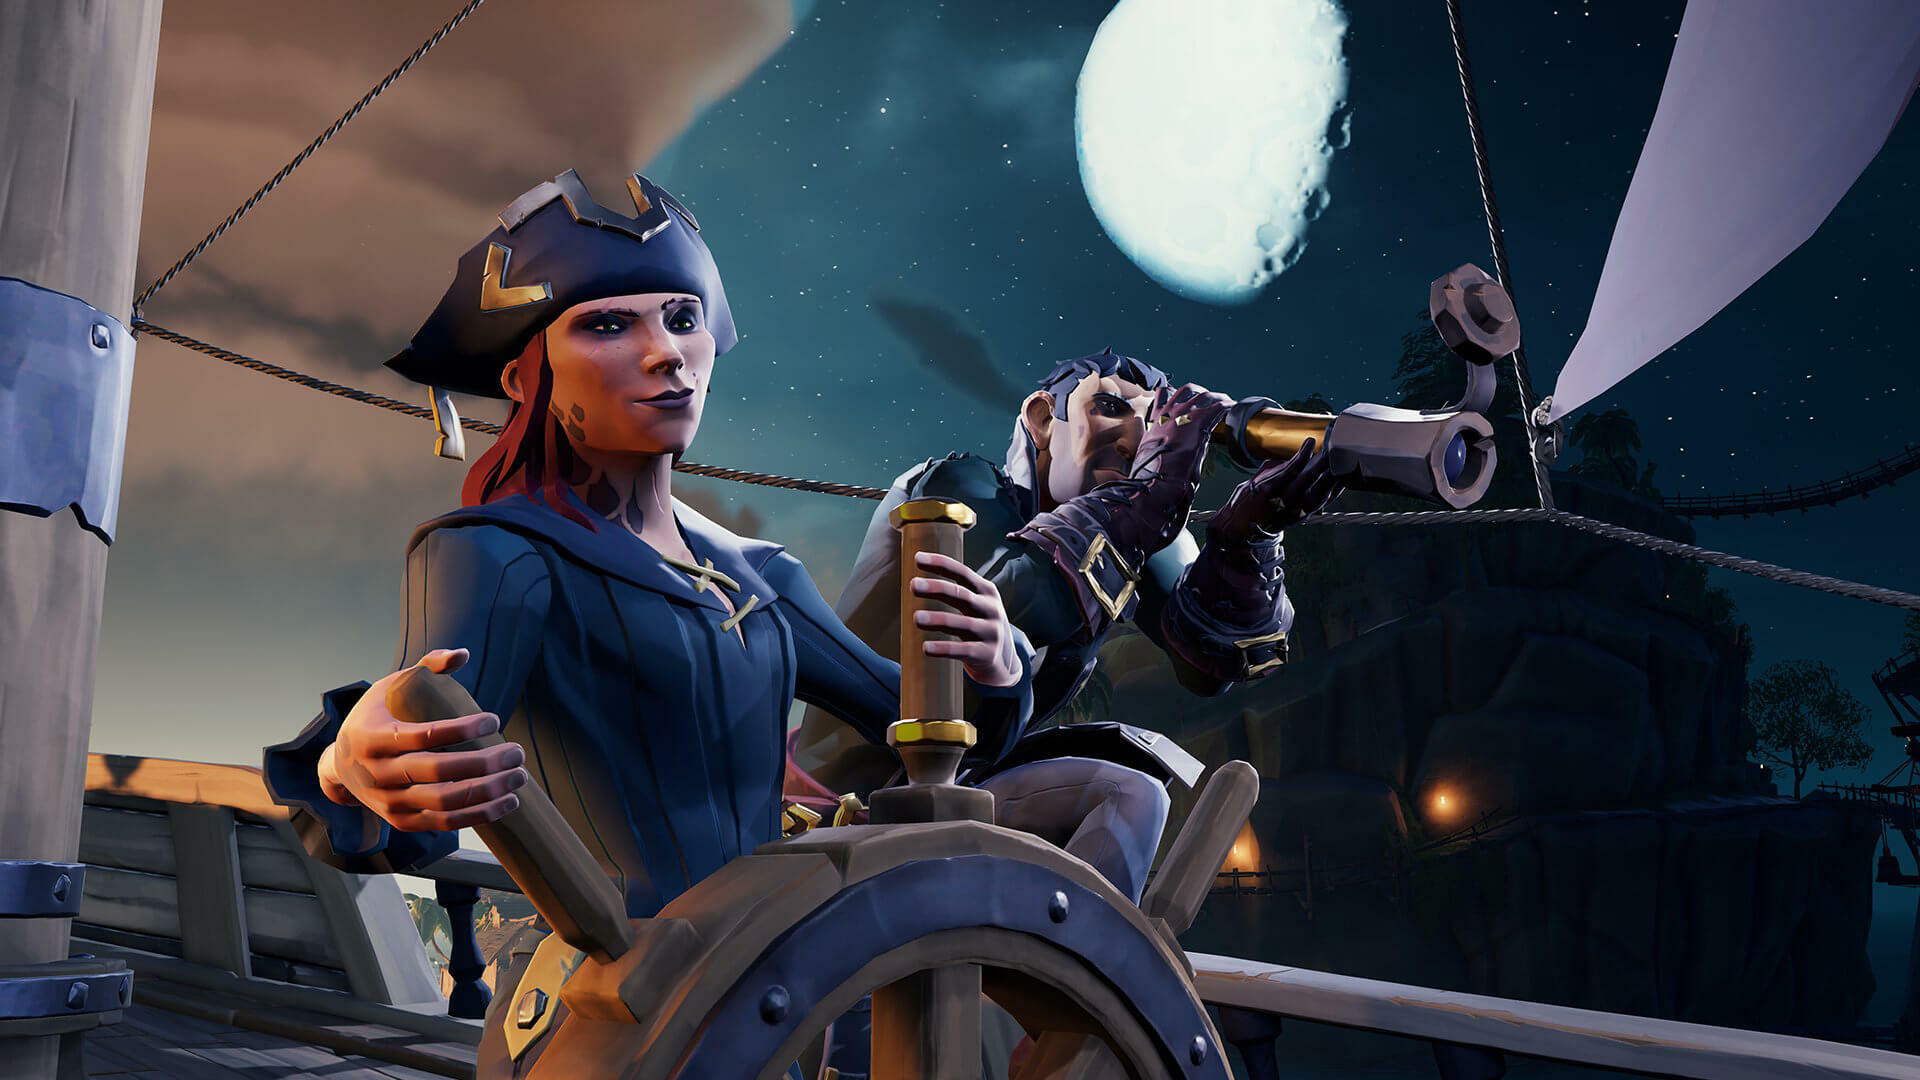 Sea of Thieves on X: Davy Jones wants every pirate to fear death, and in  two days it's up to you to make sure he doesn't put you in that spot,  pirates!